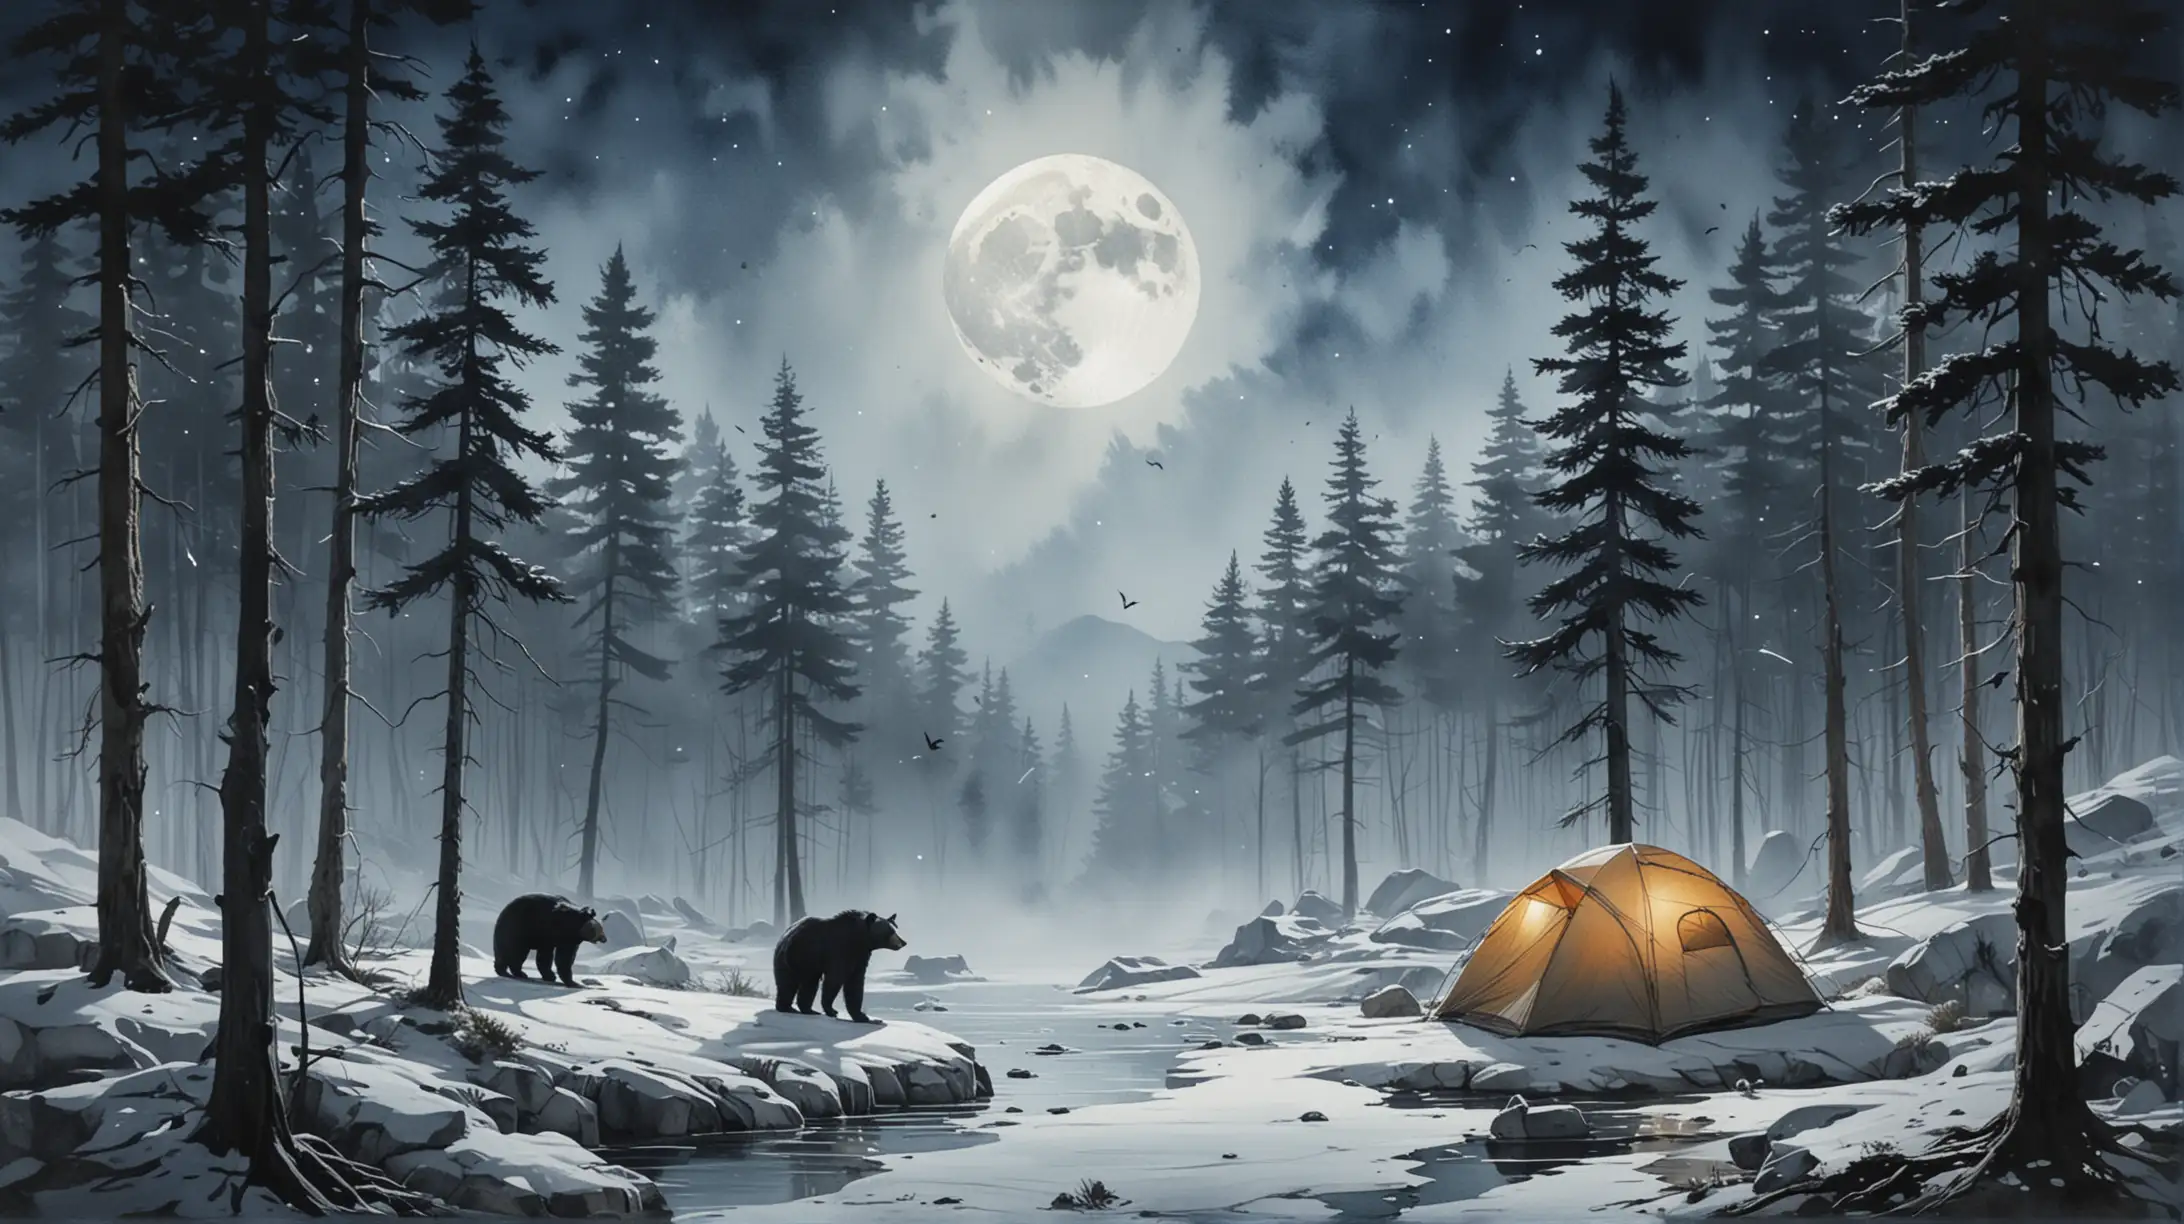 The image is a watercolor painting featuring a surreal, floating landscape with a blend of natural elements. At the top, a large, full moon dominates the background, painted in soft, muted tones of gray and white with subtle texture, giving it a realistic yet dreamy appearance.

In front of the moon, a silhouette of a tent is pitched on a small piece of land. Next to the tent, a black bear walks, adding a sense of wilderness and adventure to the scene. To the left of the tent, there is a cluster of tall, slender pine trees, also depicted in silhouette, adding to the forested feel.

The piece of land appears to be floating above a vibrant, blue, triangular waterfall or icy formation that cascades downward, tapering to a point. The blue watercolor creates a fluid, dynamic contrast to the more solid, earthy tones of the upper landscape. Birds are flying near the moon, adding a touch of movement and life to the serene, night-time scene.

The background is left white, providing a clean, minimalist canvas that highlights the central elements of the artwork. This composition combines elements of fantasy and nature, creating a peaceful and imaginative visual experience.